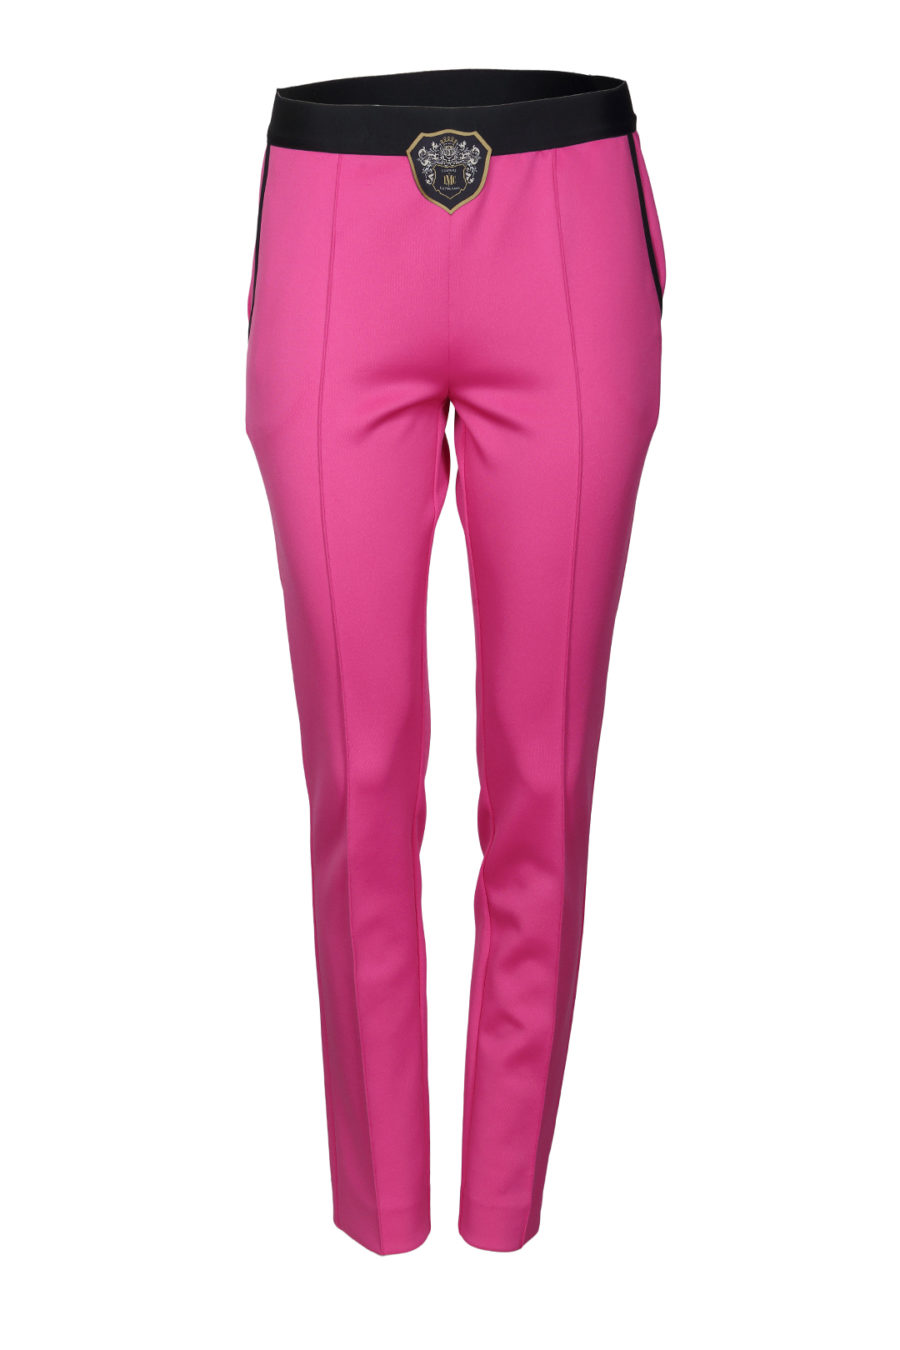 LMC Trousers Golf - Couture